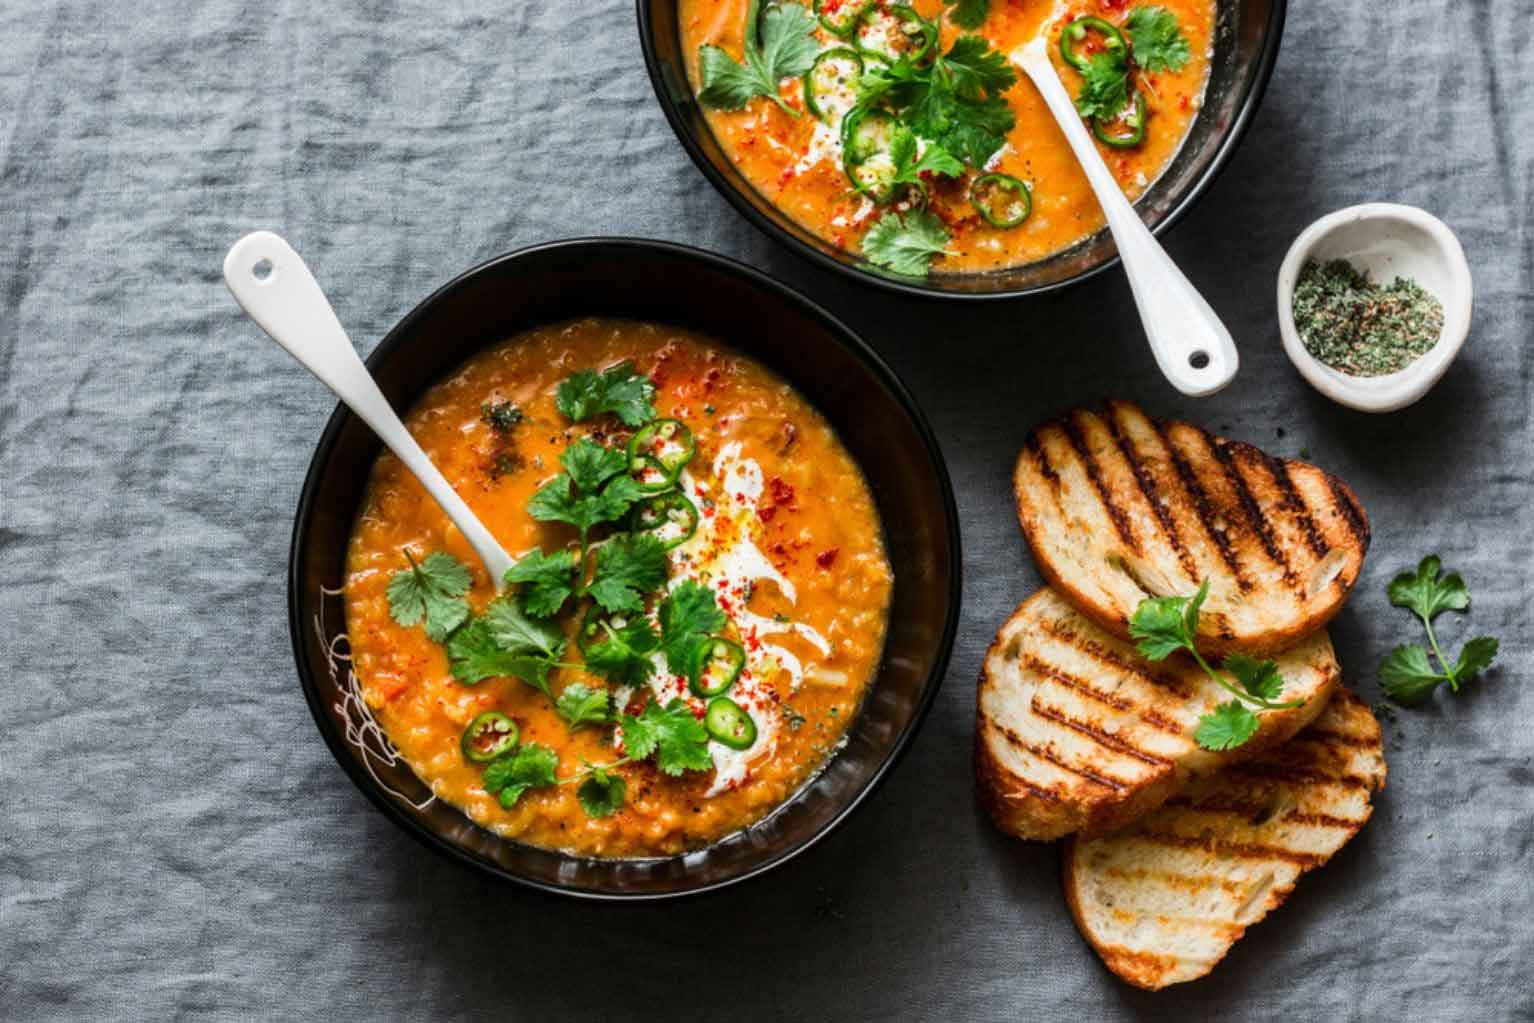 Lentil soup with cilantro in a black bowl with a white spoon next to three pieces of toast on a gray background